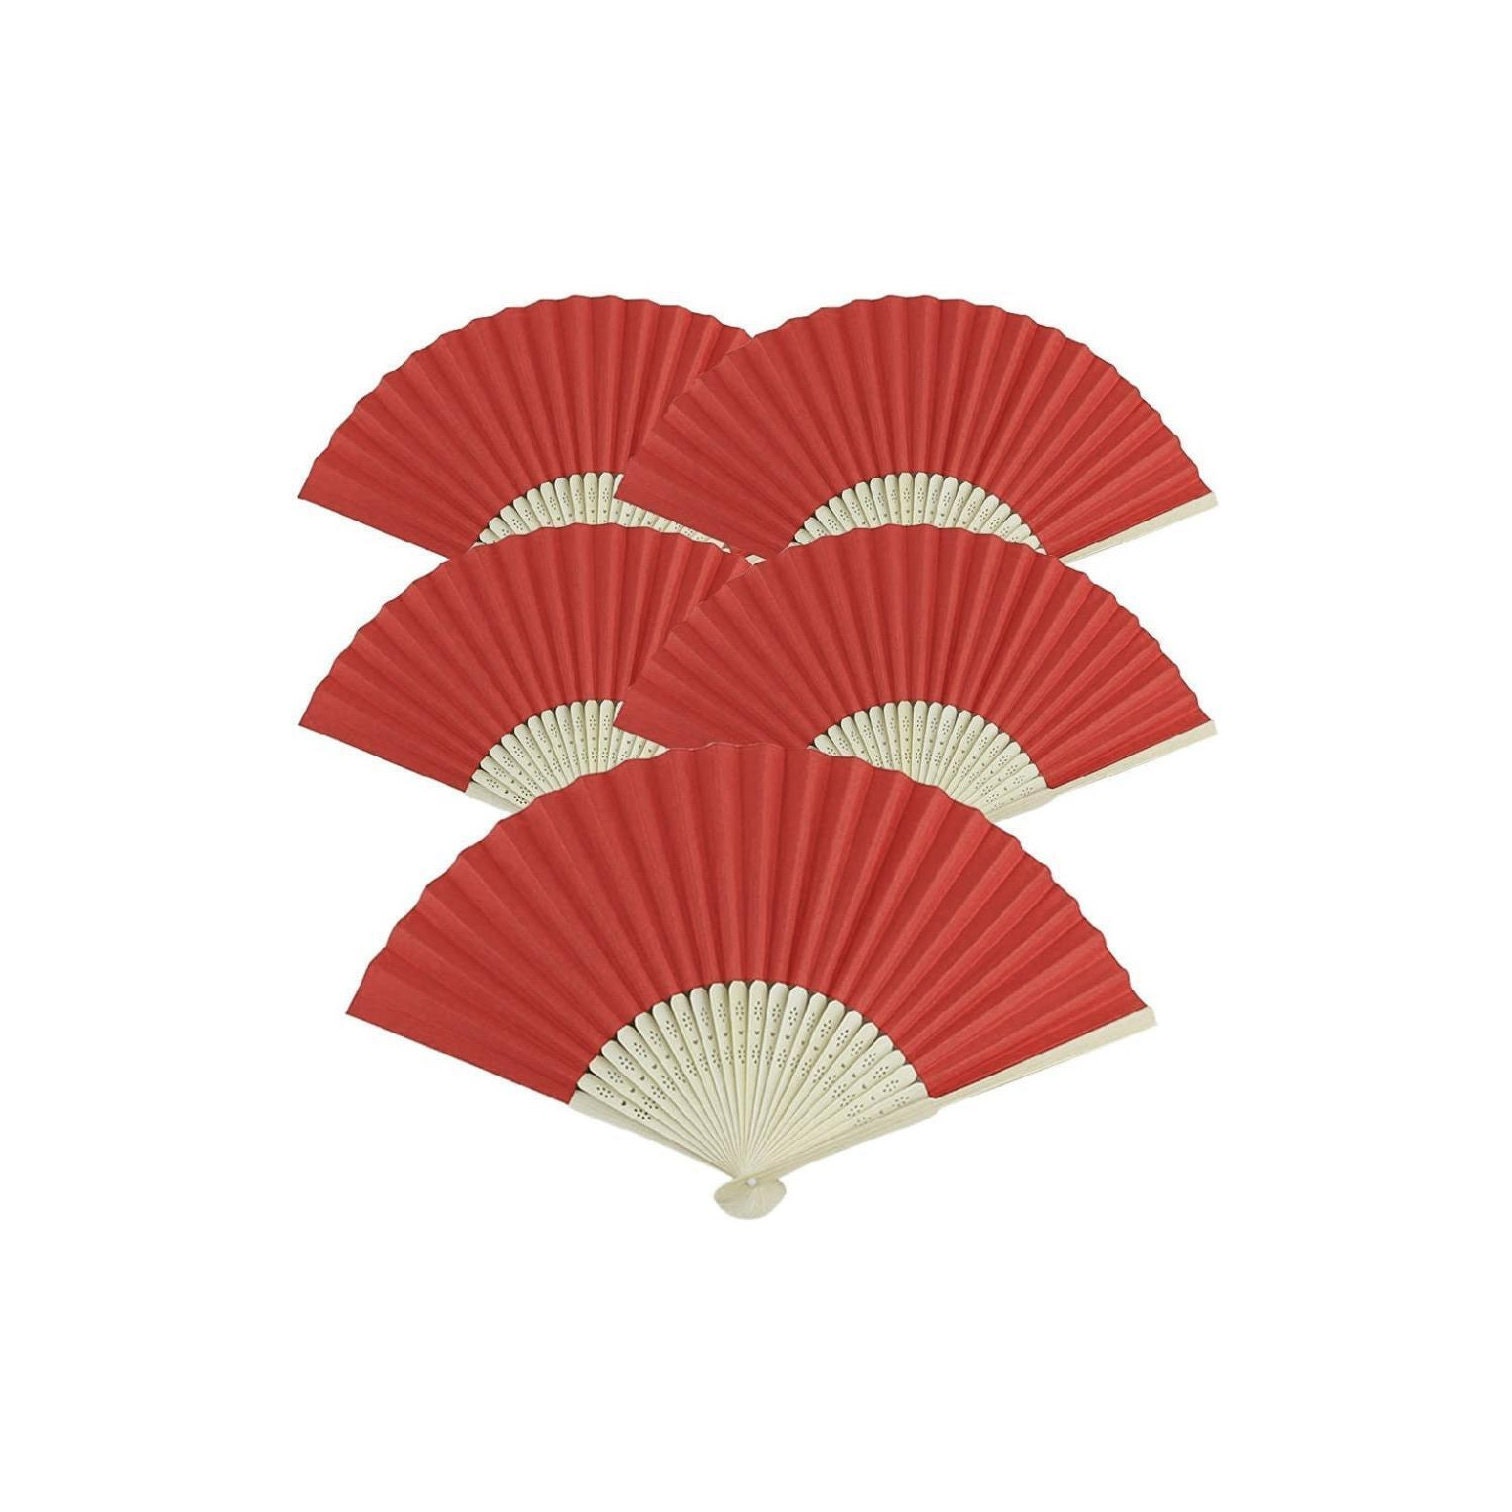 Chinese Traditional Paper Fan, bamboo in the breeze - Artistic Fans - Fans  - Products - Webmartial